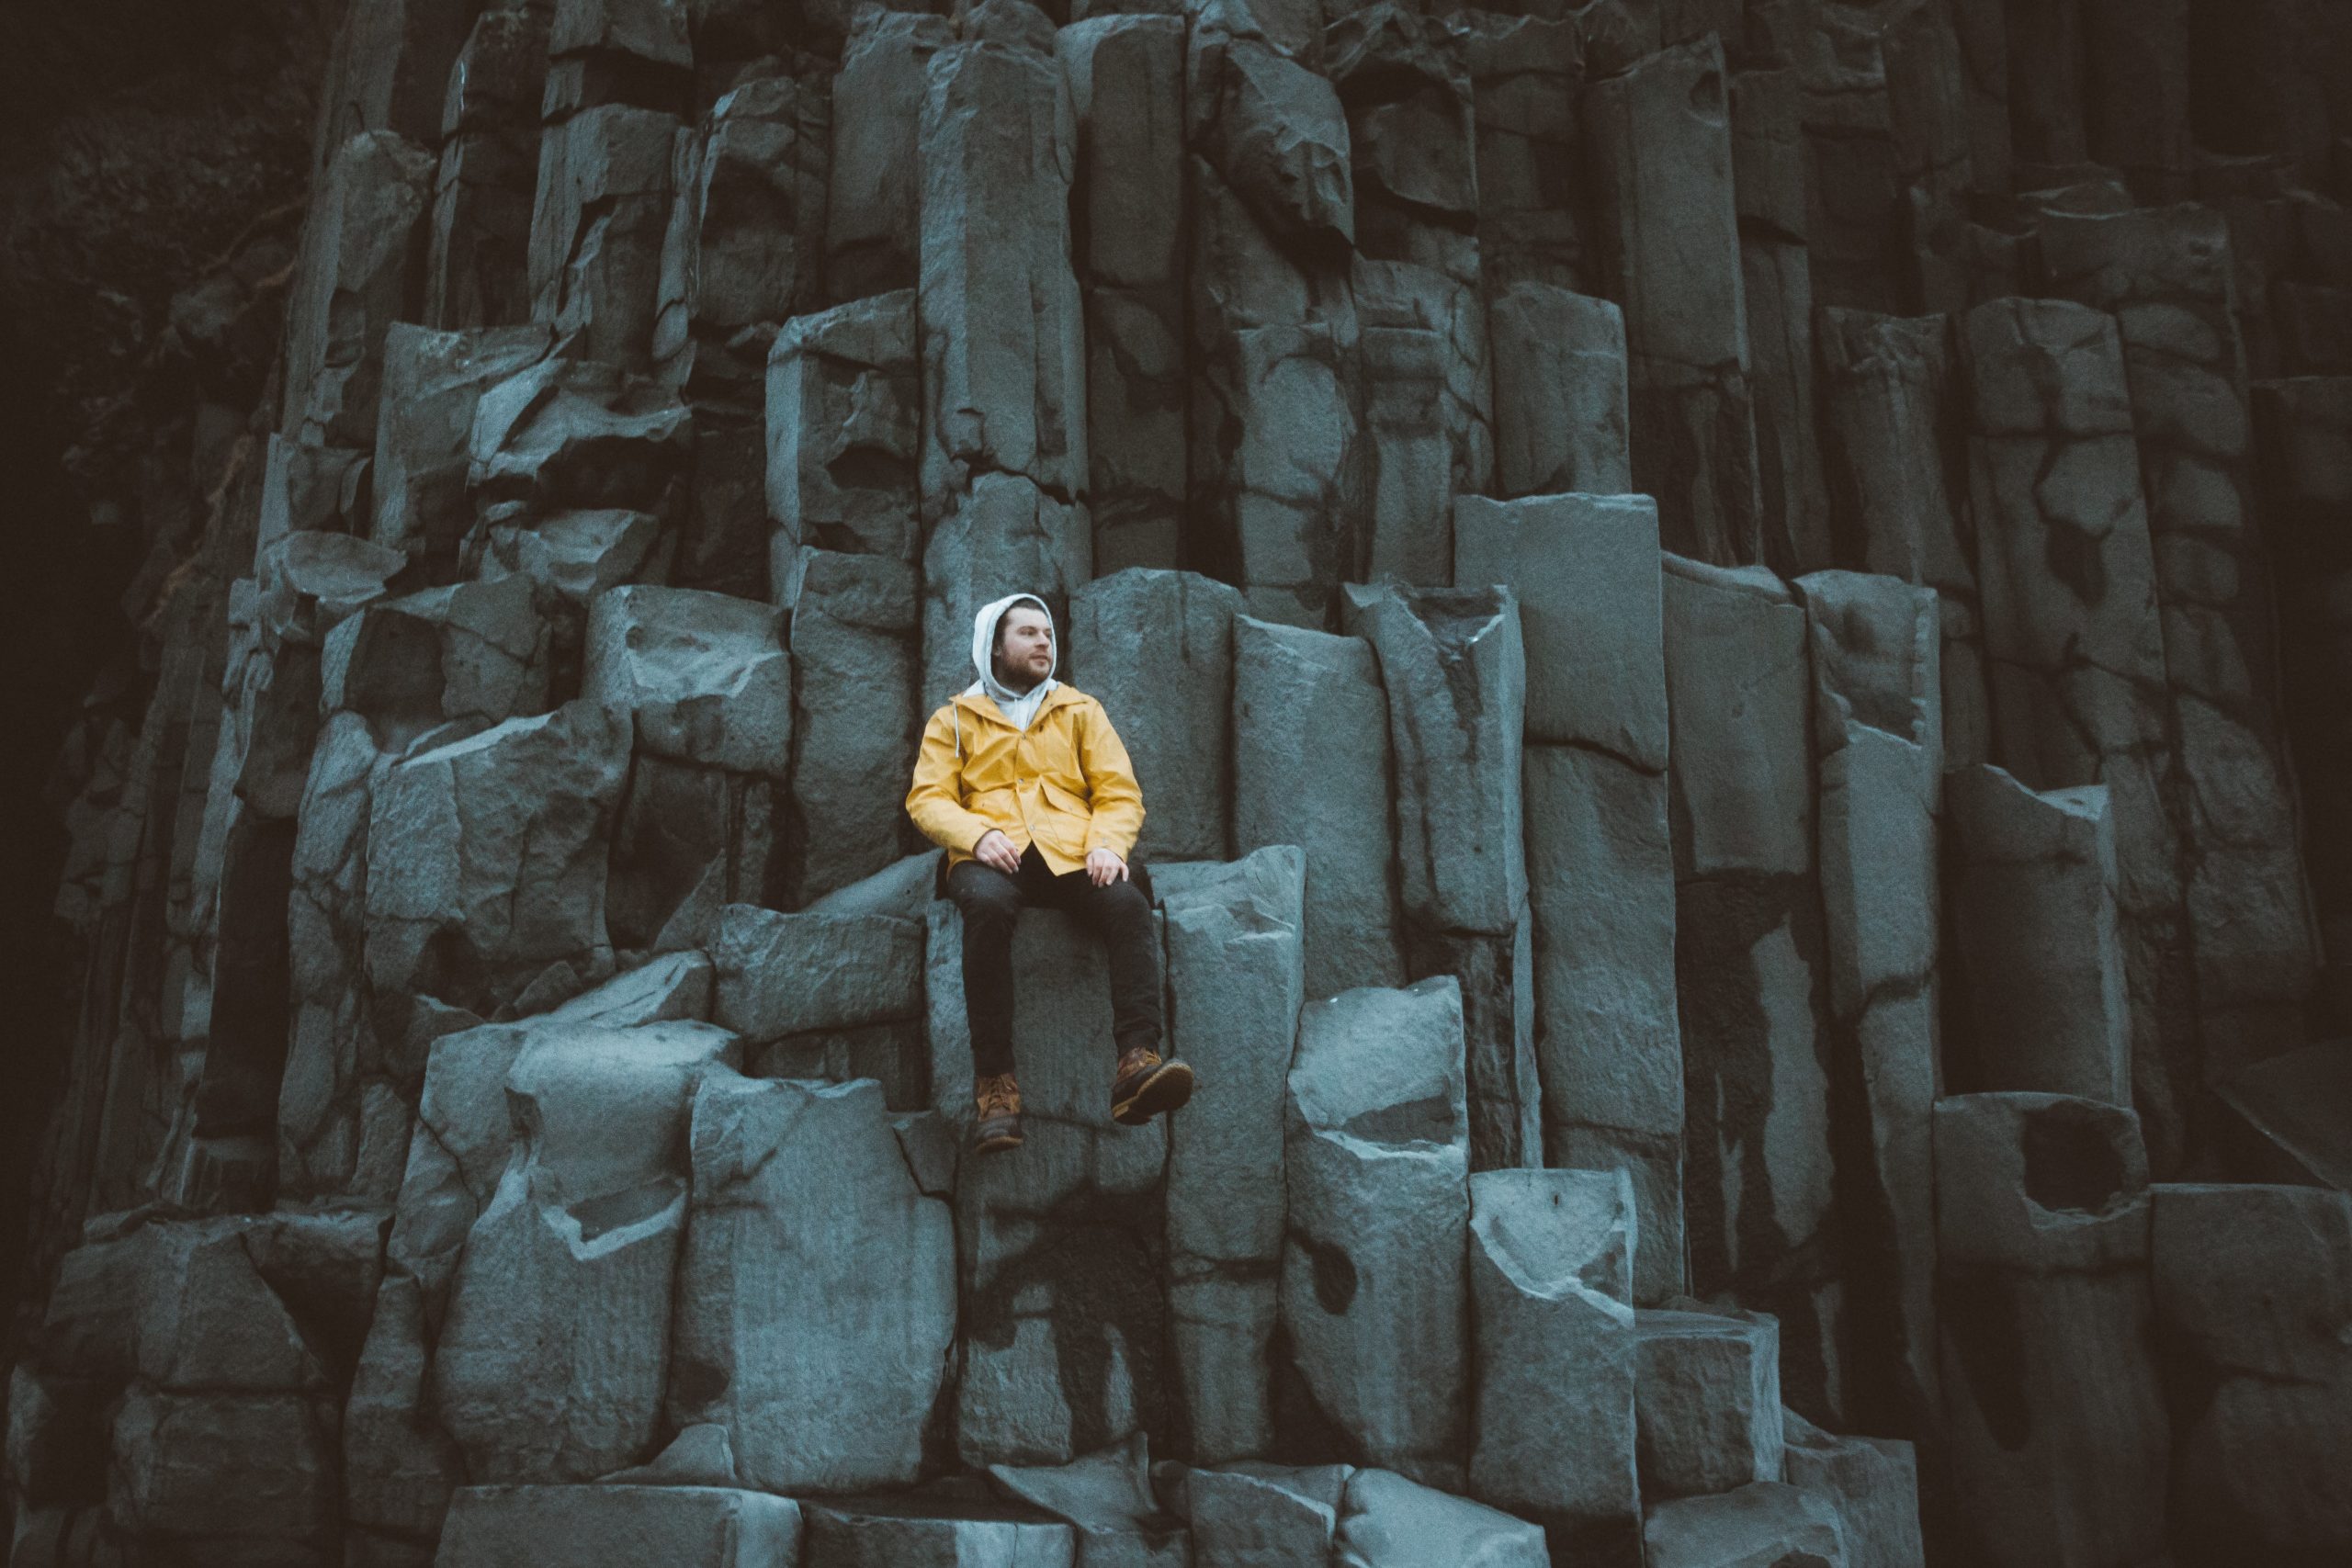 A man photographed at Reynisfjara beach in Iceland